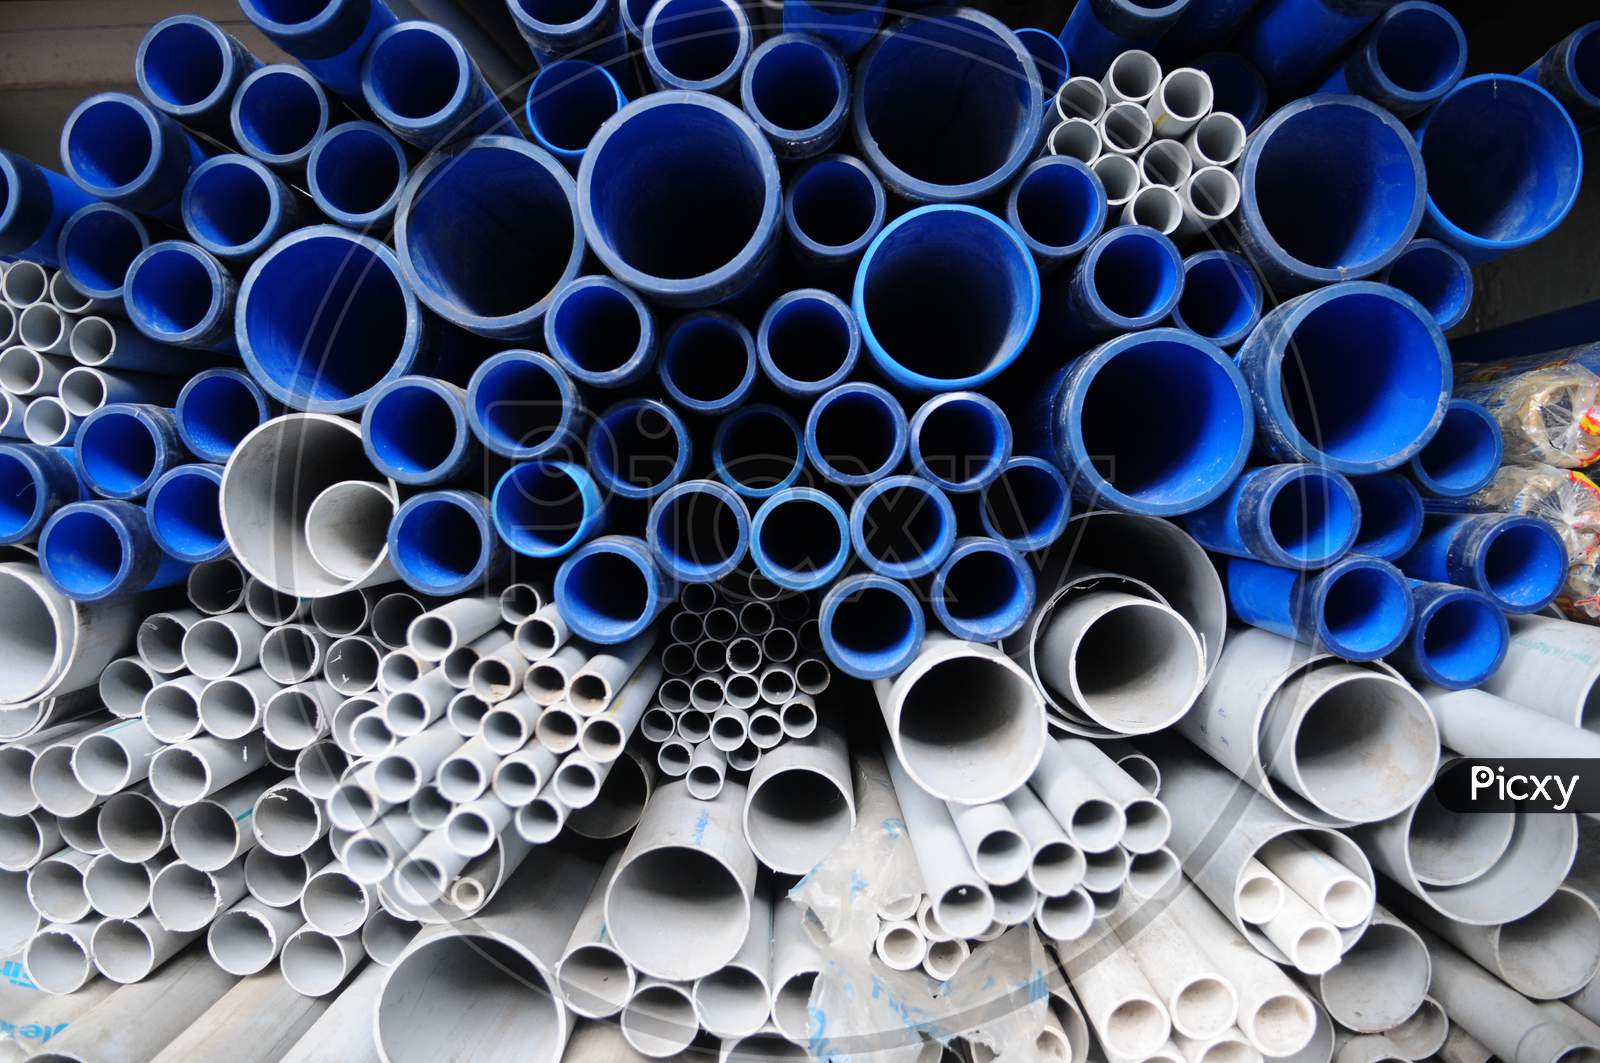 Patterns of different sizes of PVC Pipes